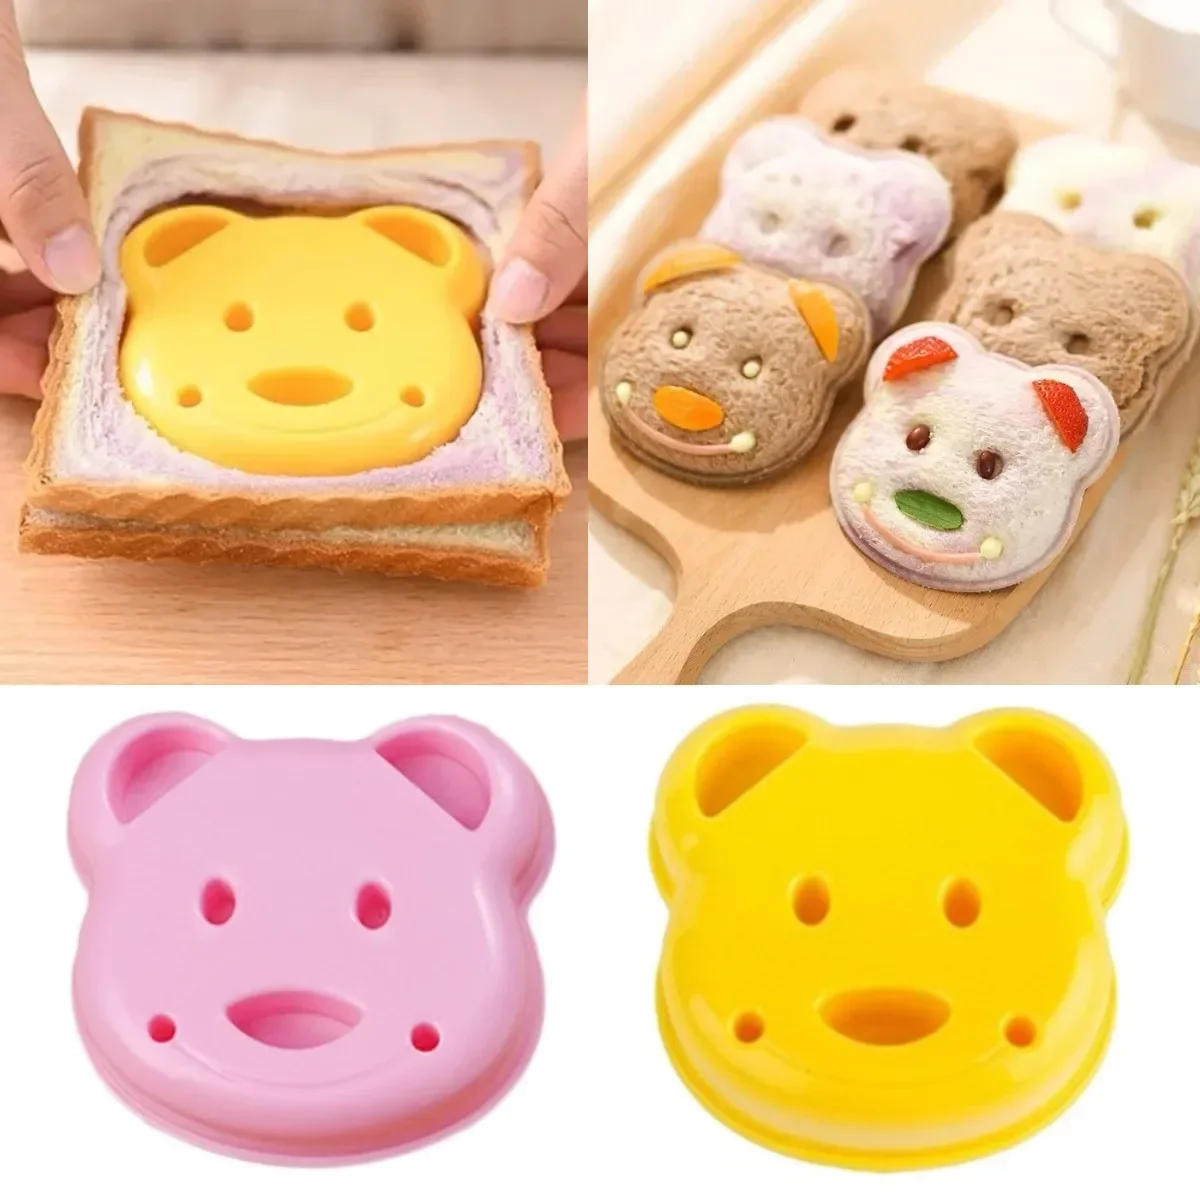 

Cute Sandwich Mould Bear Shaped Bread Biscuit Cookie Cutter Baking Pastry Tool Cartoon Cake Make Mold DIY Pancakes Kids Bento